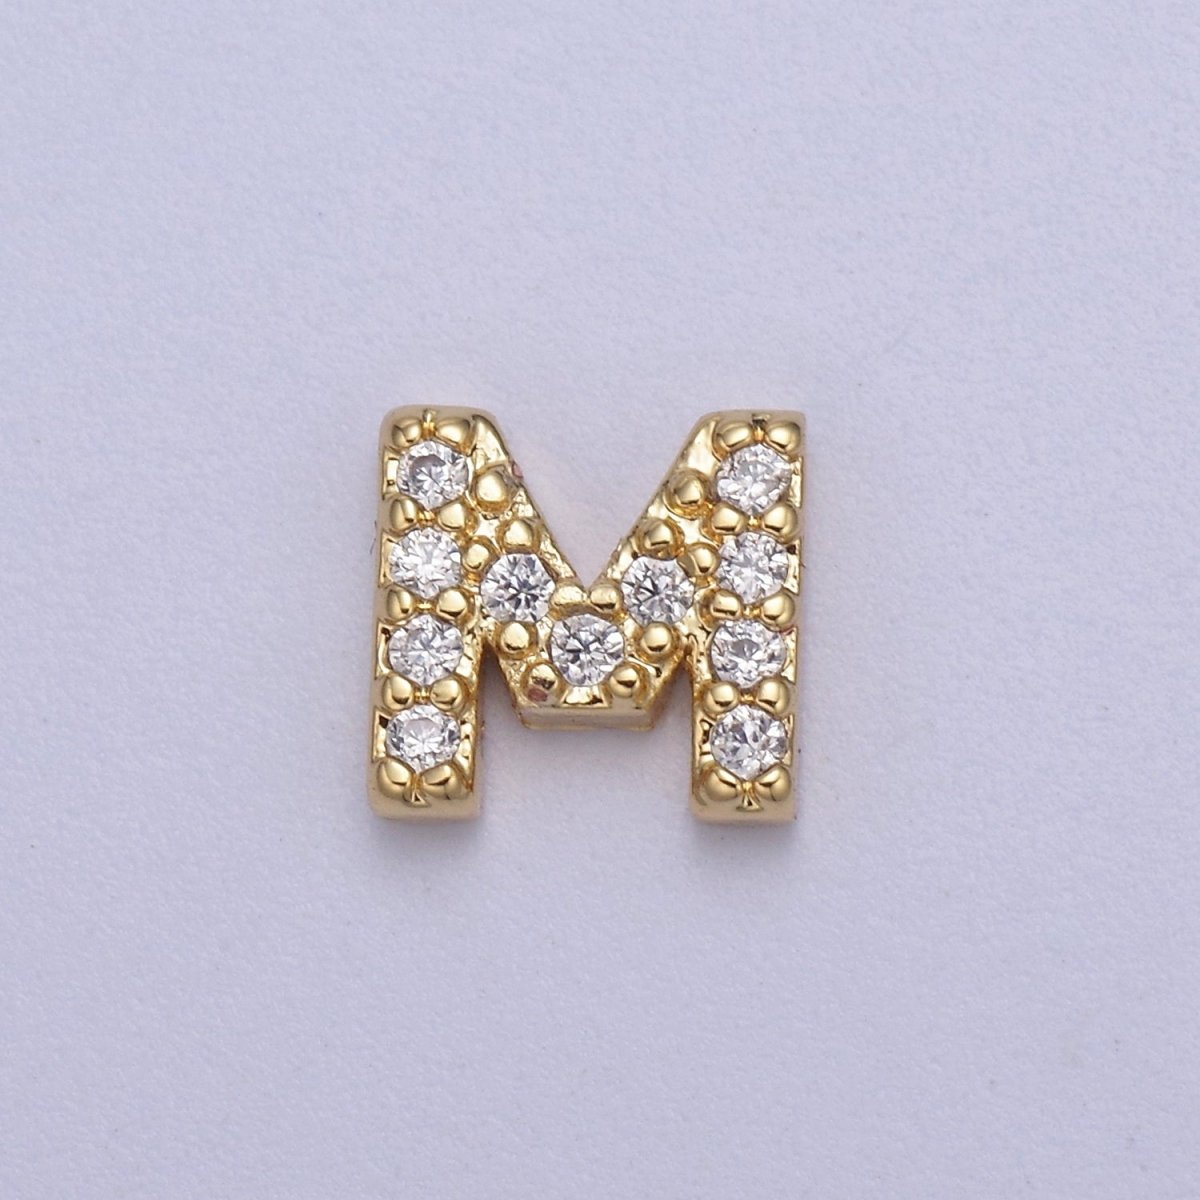 Special New Collection 14K Gold Filled Initial Beads For Personalized Locket Jewelry Making W-122 - W-147 N-580 N-581 - DLUXCA